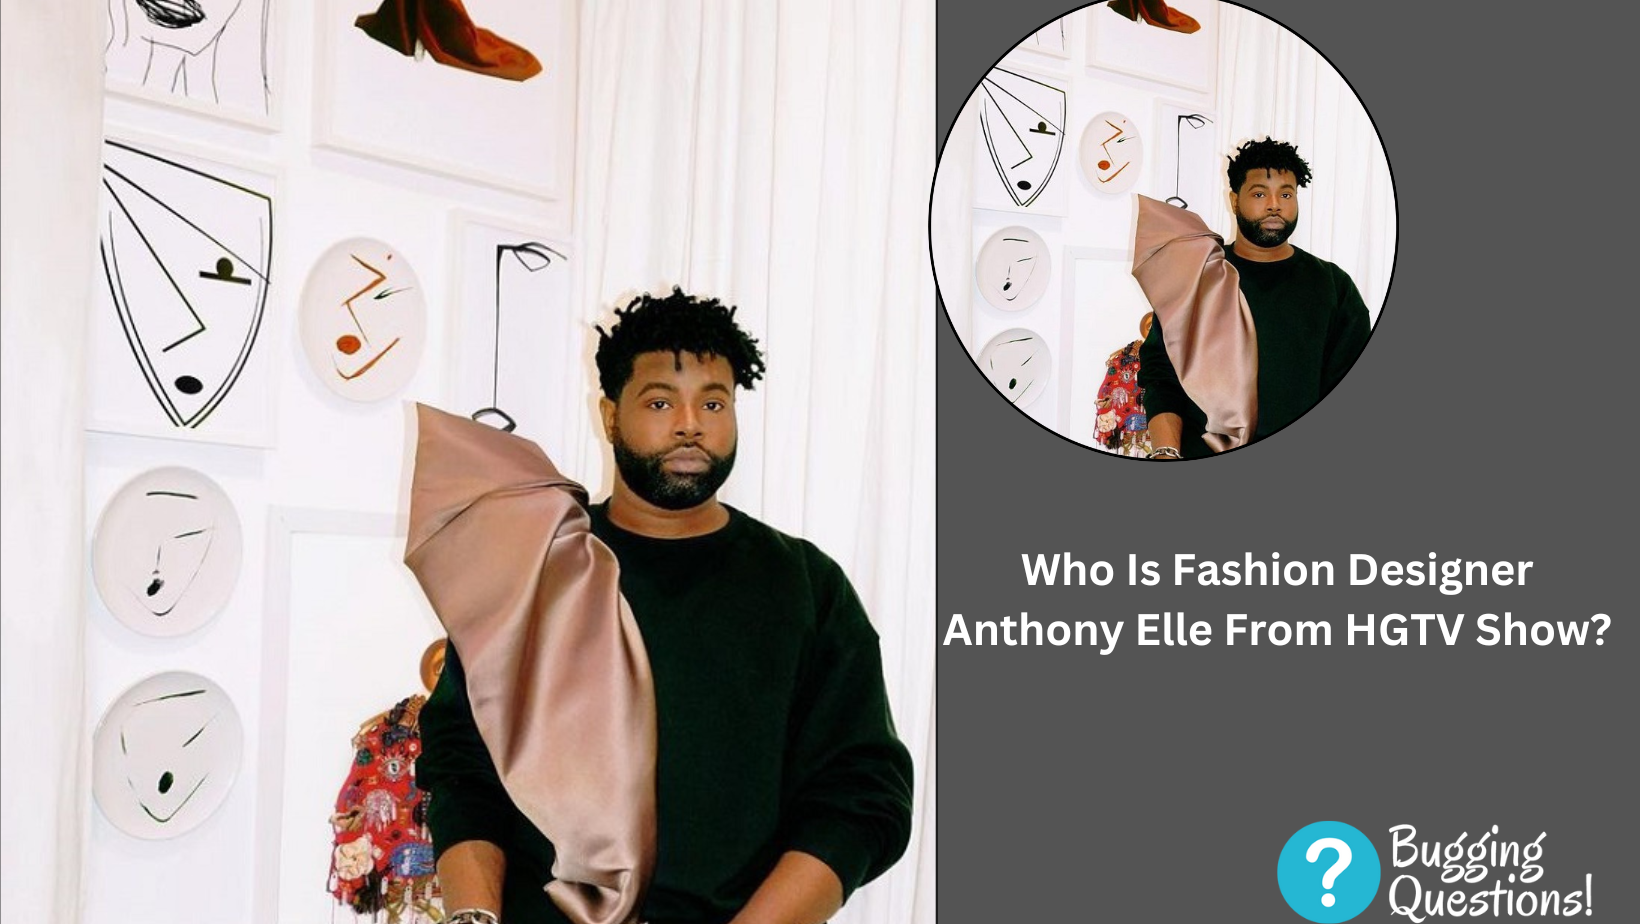 Who Is Fashion Designer Anthony Elle From HGTV Show?